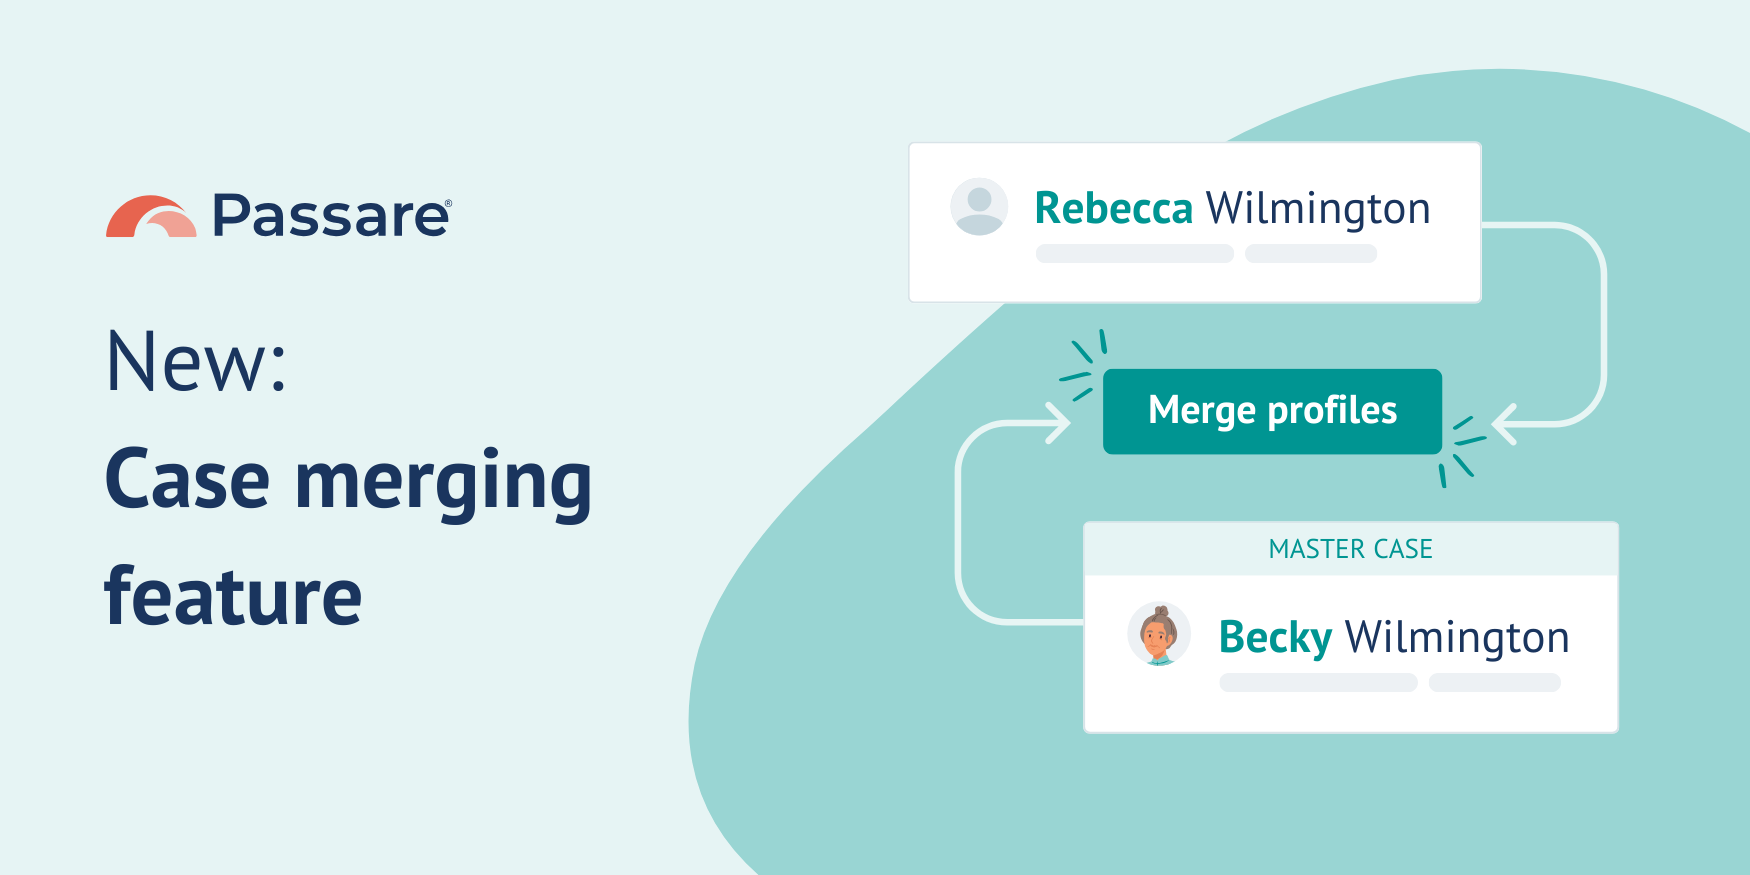 Say Goodbye to Duplicate Cases with Our New Case Merging Feature